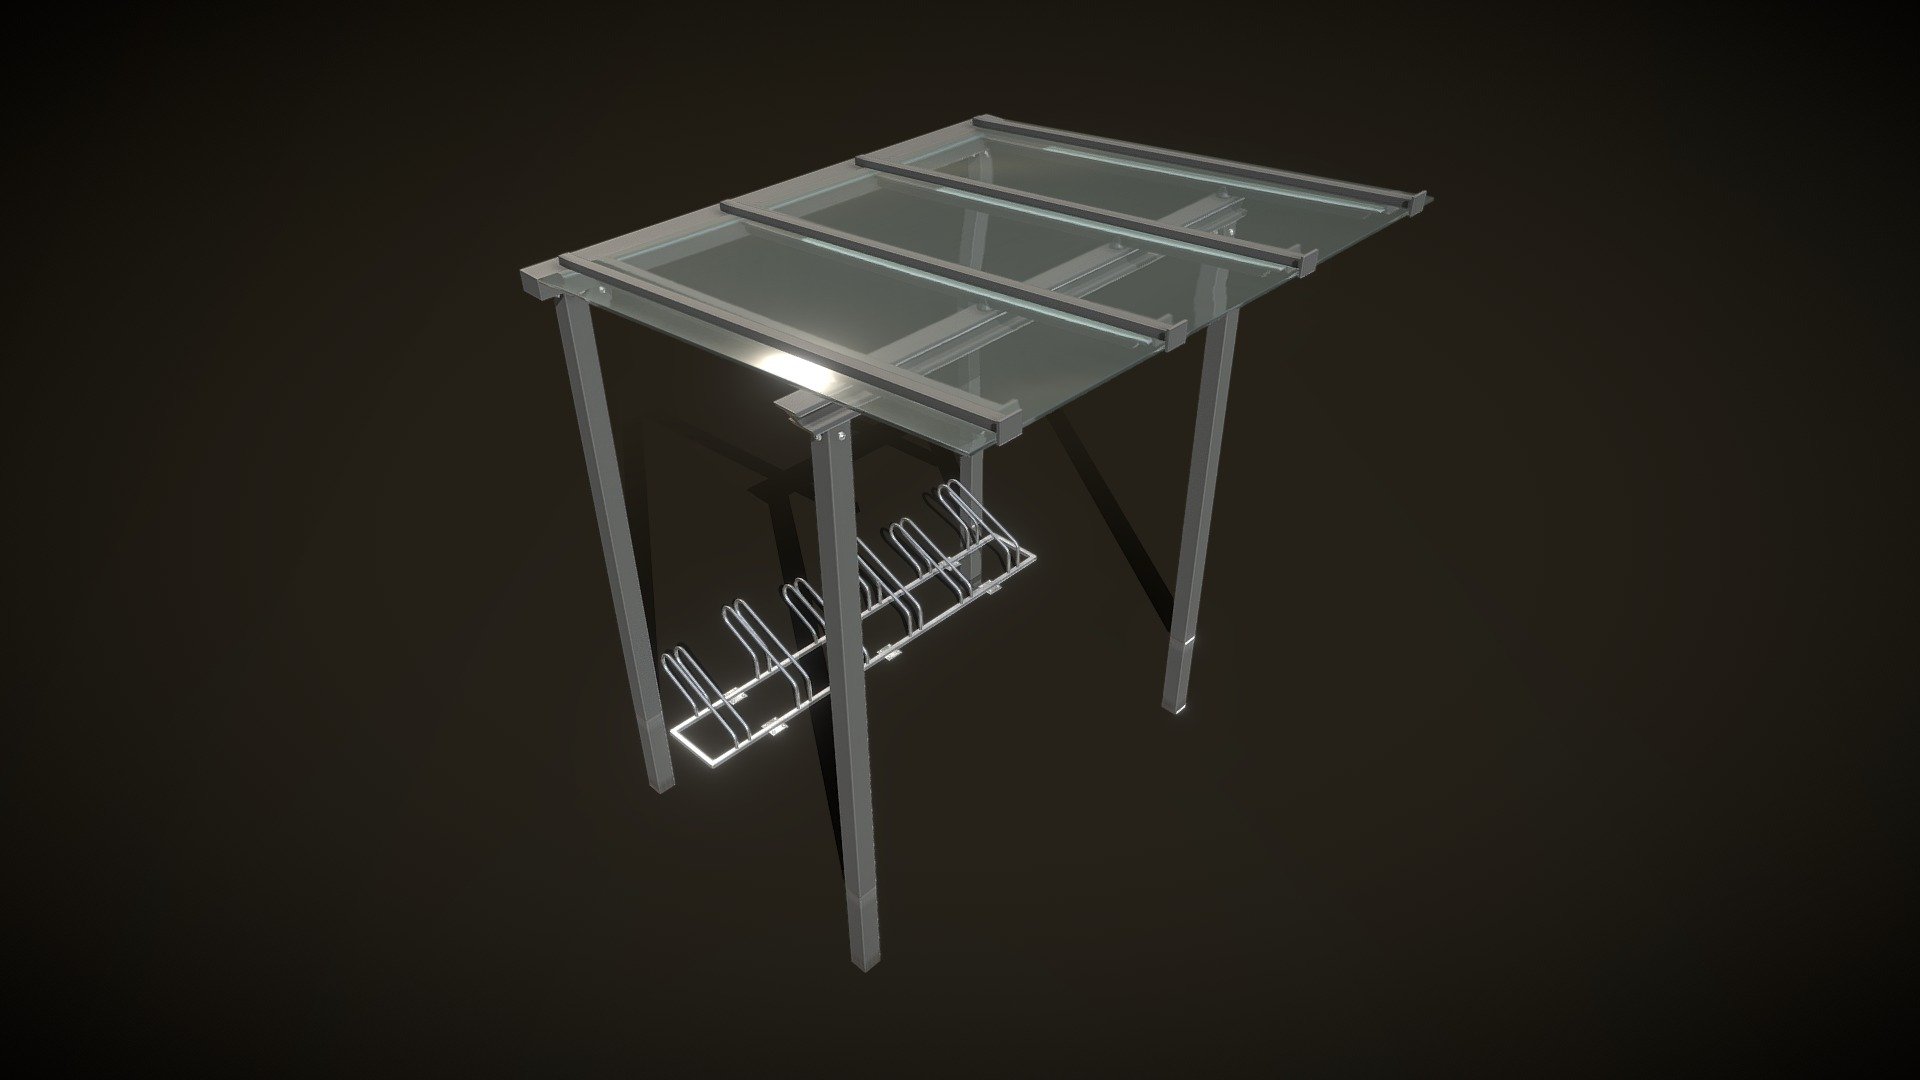 Here is bicycle stand 1version 10 with glass roof.



PBR-Textures in 4K



Object Name - Bicycle_Stand_1_Version_10_Glass_Roof 



Object Dimensions -  2.591m x 2.327m x 3.041m



Vertices = 4105


Edges = 11157
Polygons = 7146

3D model formats: 


Native format (*.blend)
Autodesk FBX (.fbx)
OBJ (.obj, .mtl)
glTF (.gltf, .glb)
X3D (.x3d)
Collada (.dae)
Stereolithography (.stl)
Polygon File Format (.ply)
Alembic (.abc)
DXF (.dxf)
USDC



Created with the modulare bike stand construction kit


Modeled and textured by 3DHaupt in Blender-2.9.1 - Bicycle Stand [1] Version [10] Glass Roof - Buy Royalty Free 3D model by VIS-All-3D (@VIS-All) 3d model